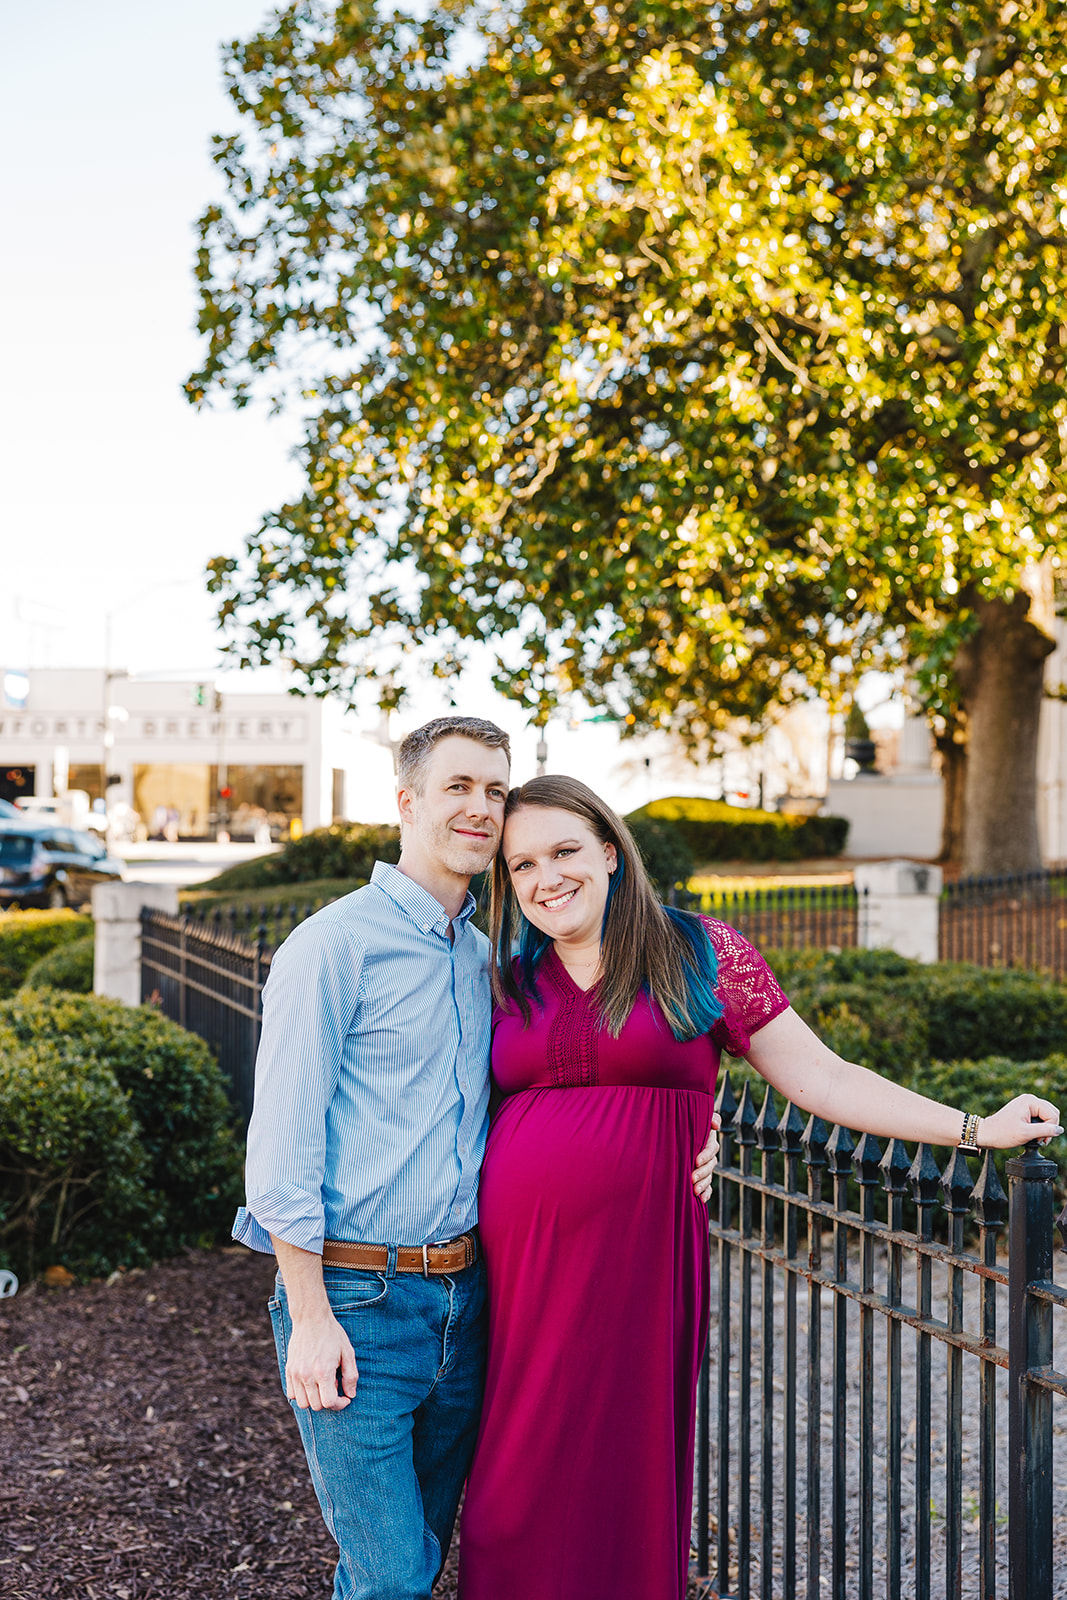 spring maternity session in downtown athens, ga